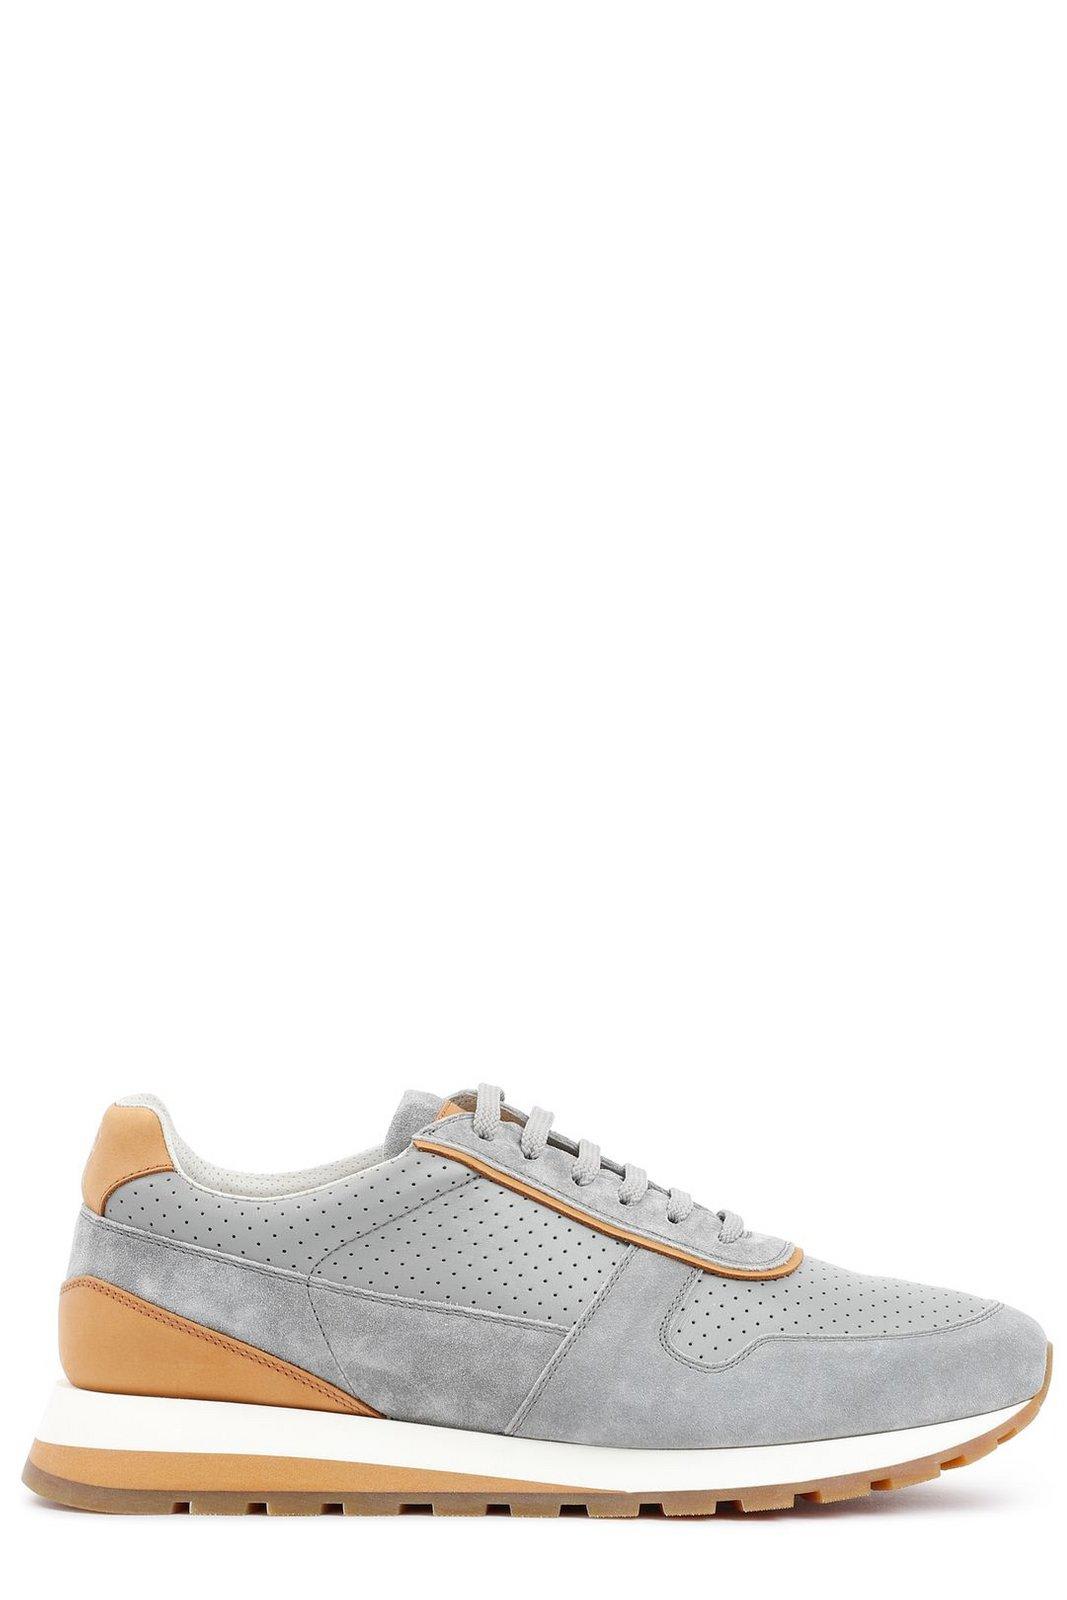 Brunello Cucinelli Perforated-detail Lace-up Sneakers